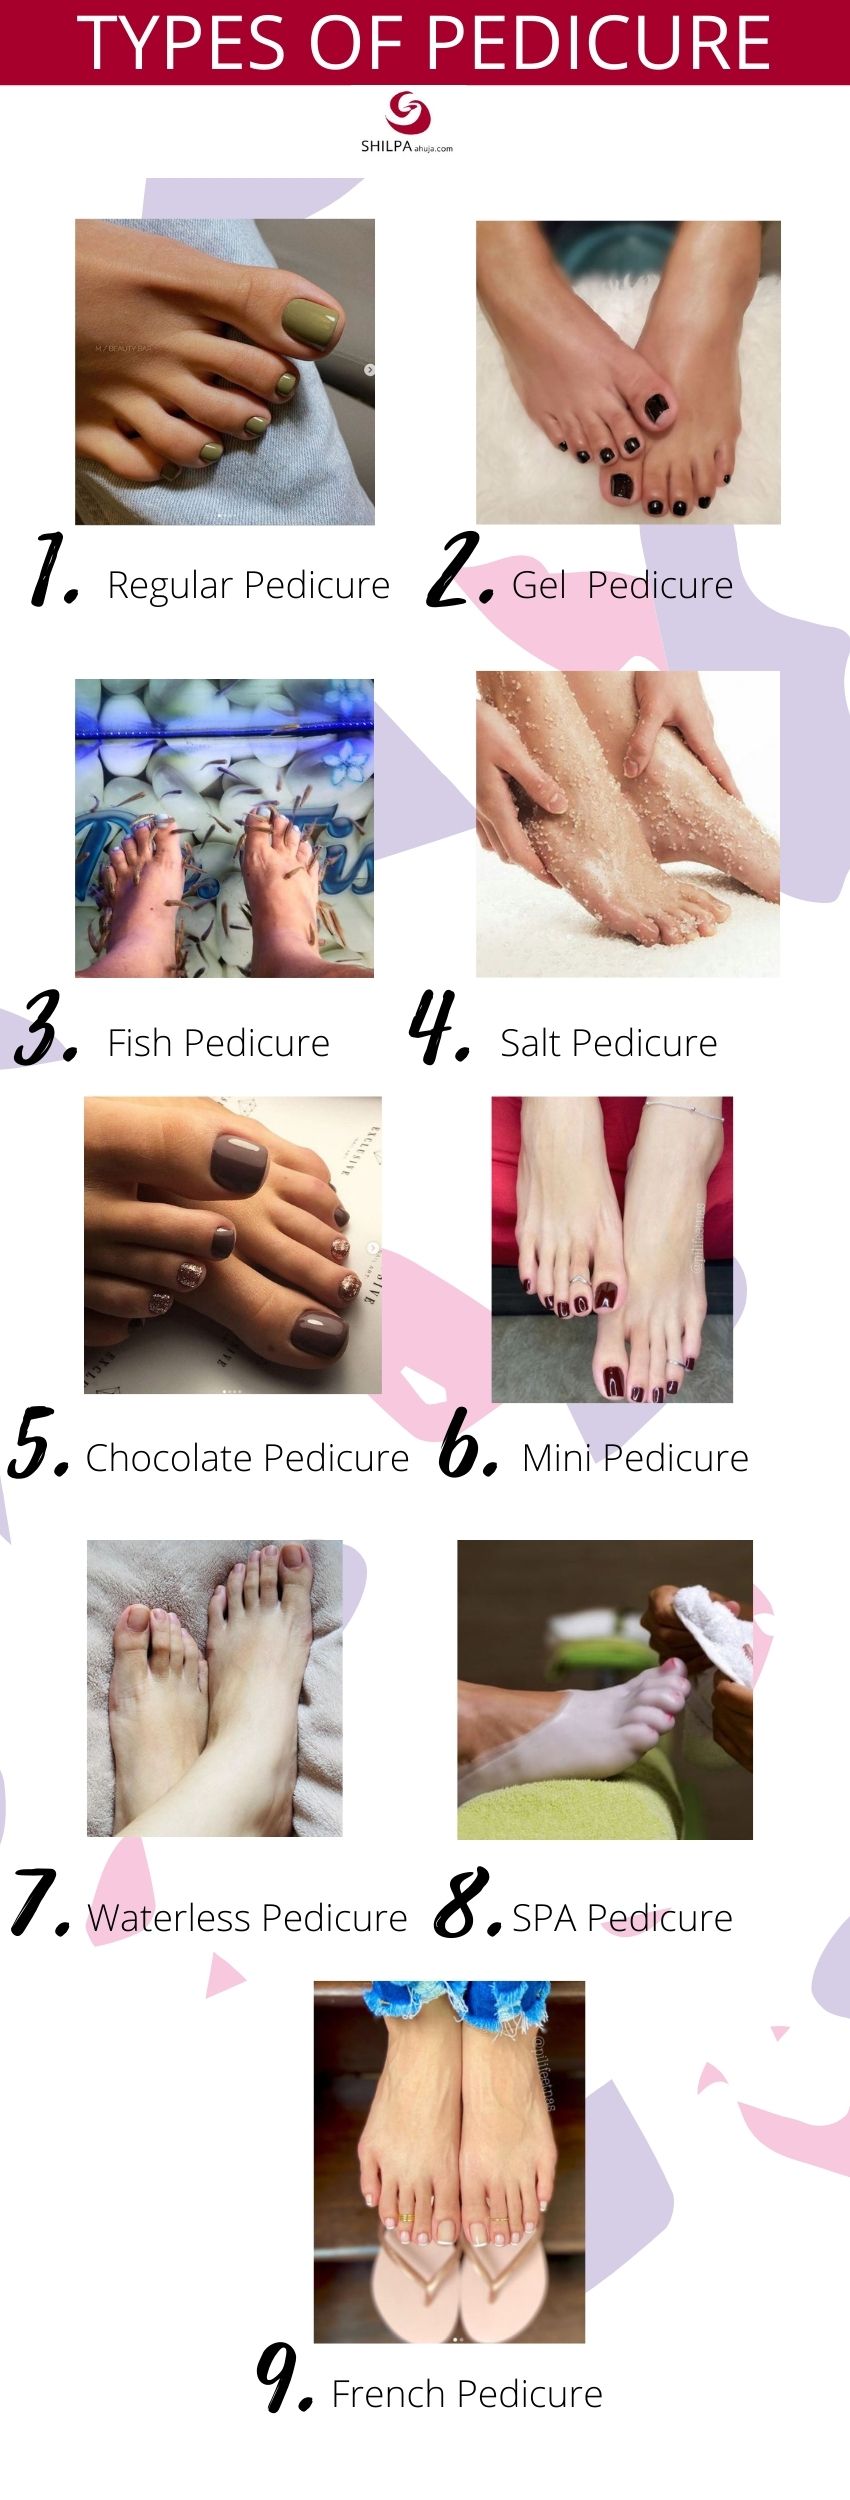 Types of pedicure collage